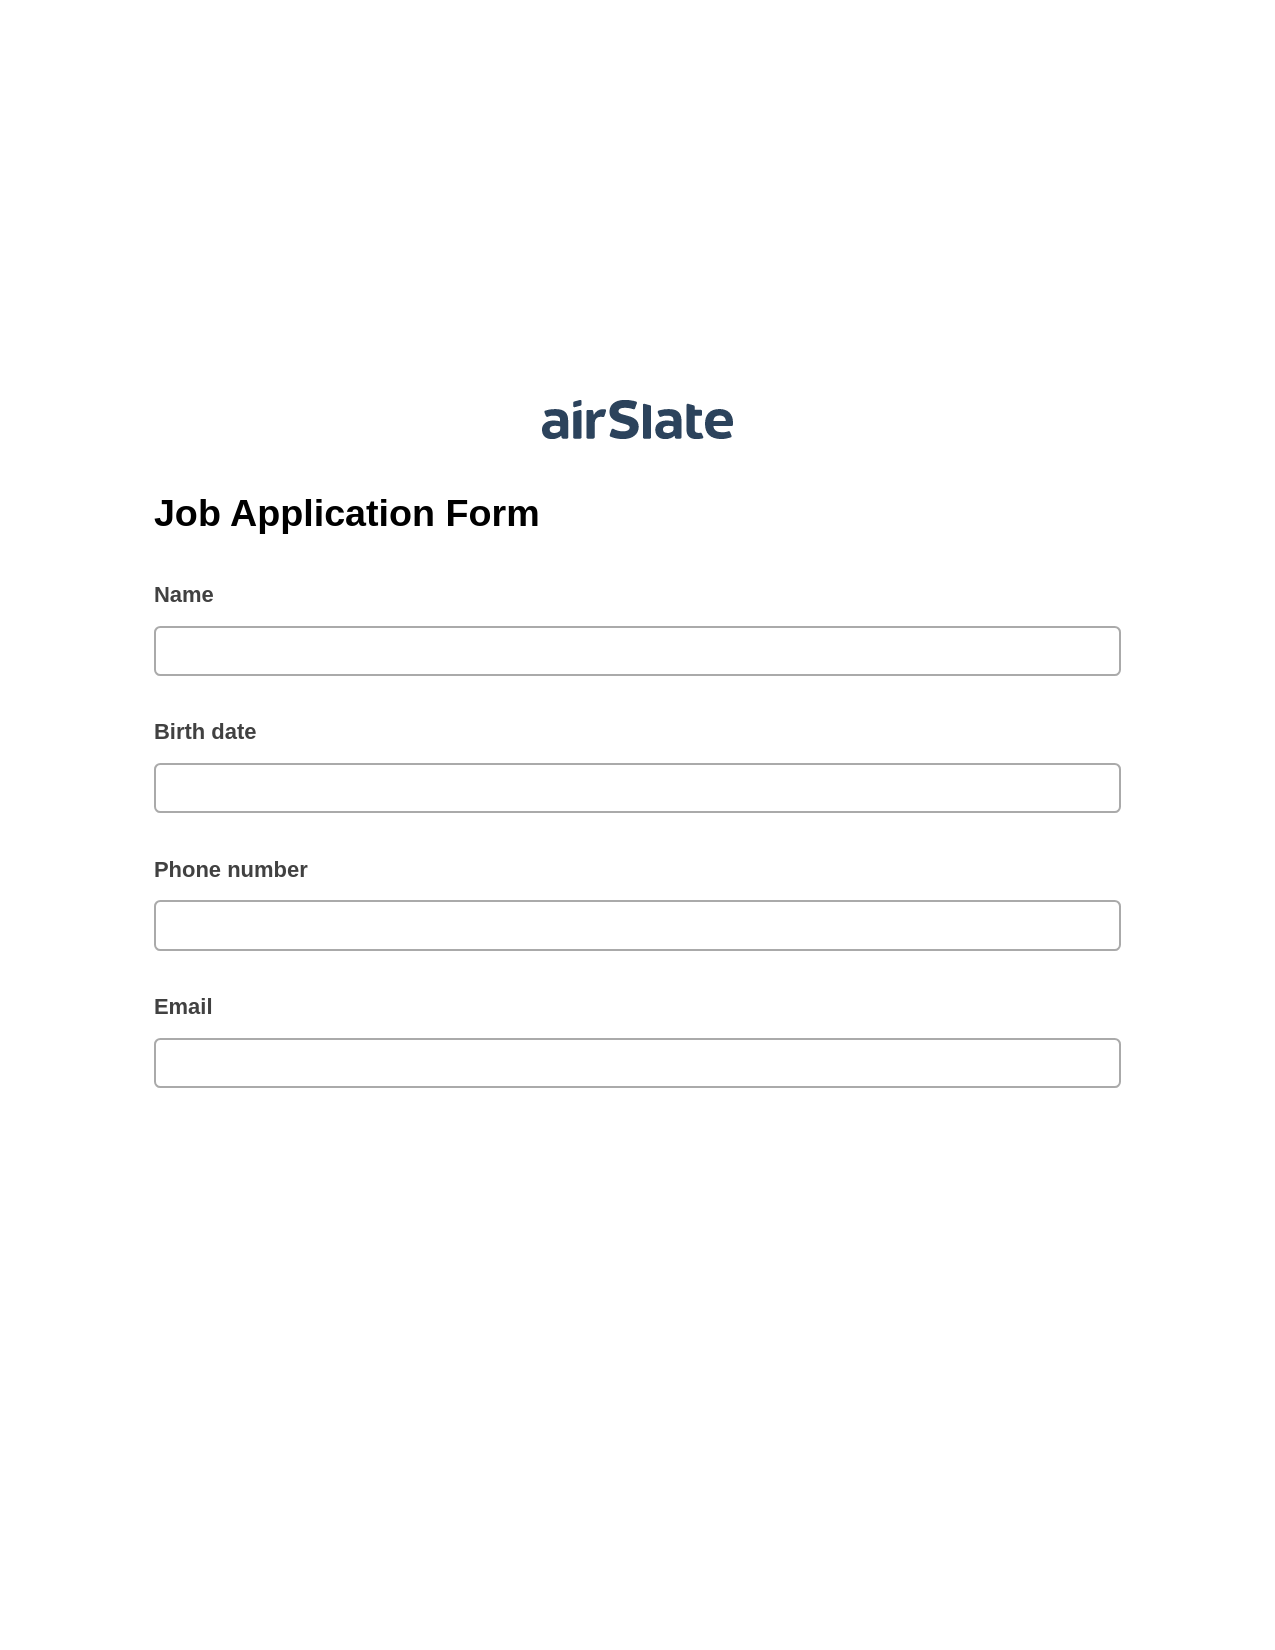 Multirole Job Application Form Pre-fill from CSV File Dropdown Options Bot, Send a Slate to MS Dynamics 365 Contact Bot, Export to Formstack Documents Bot